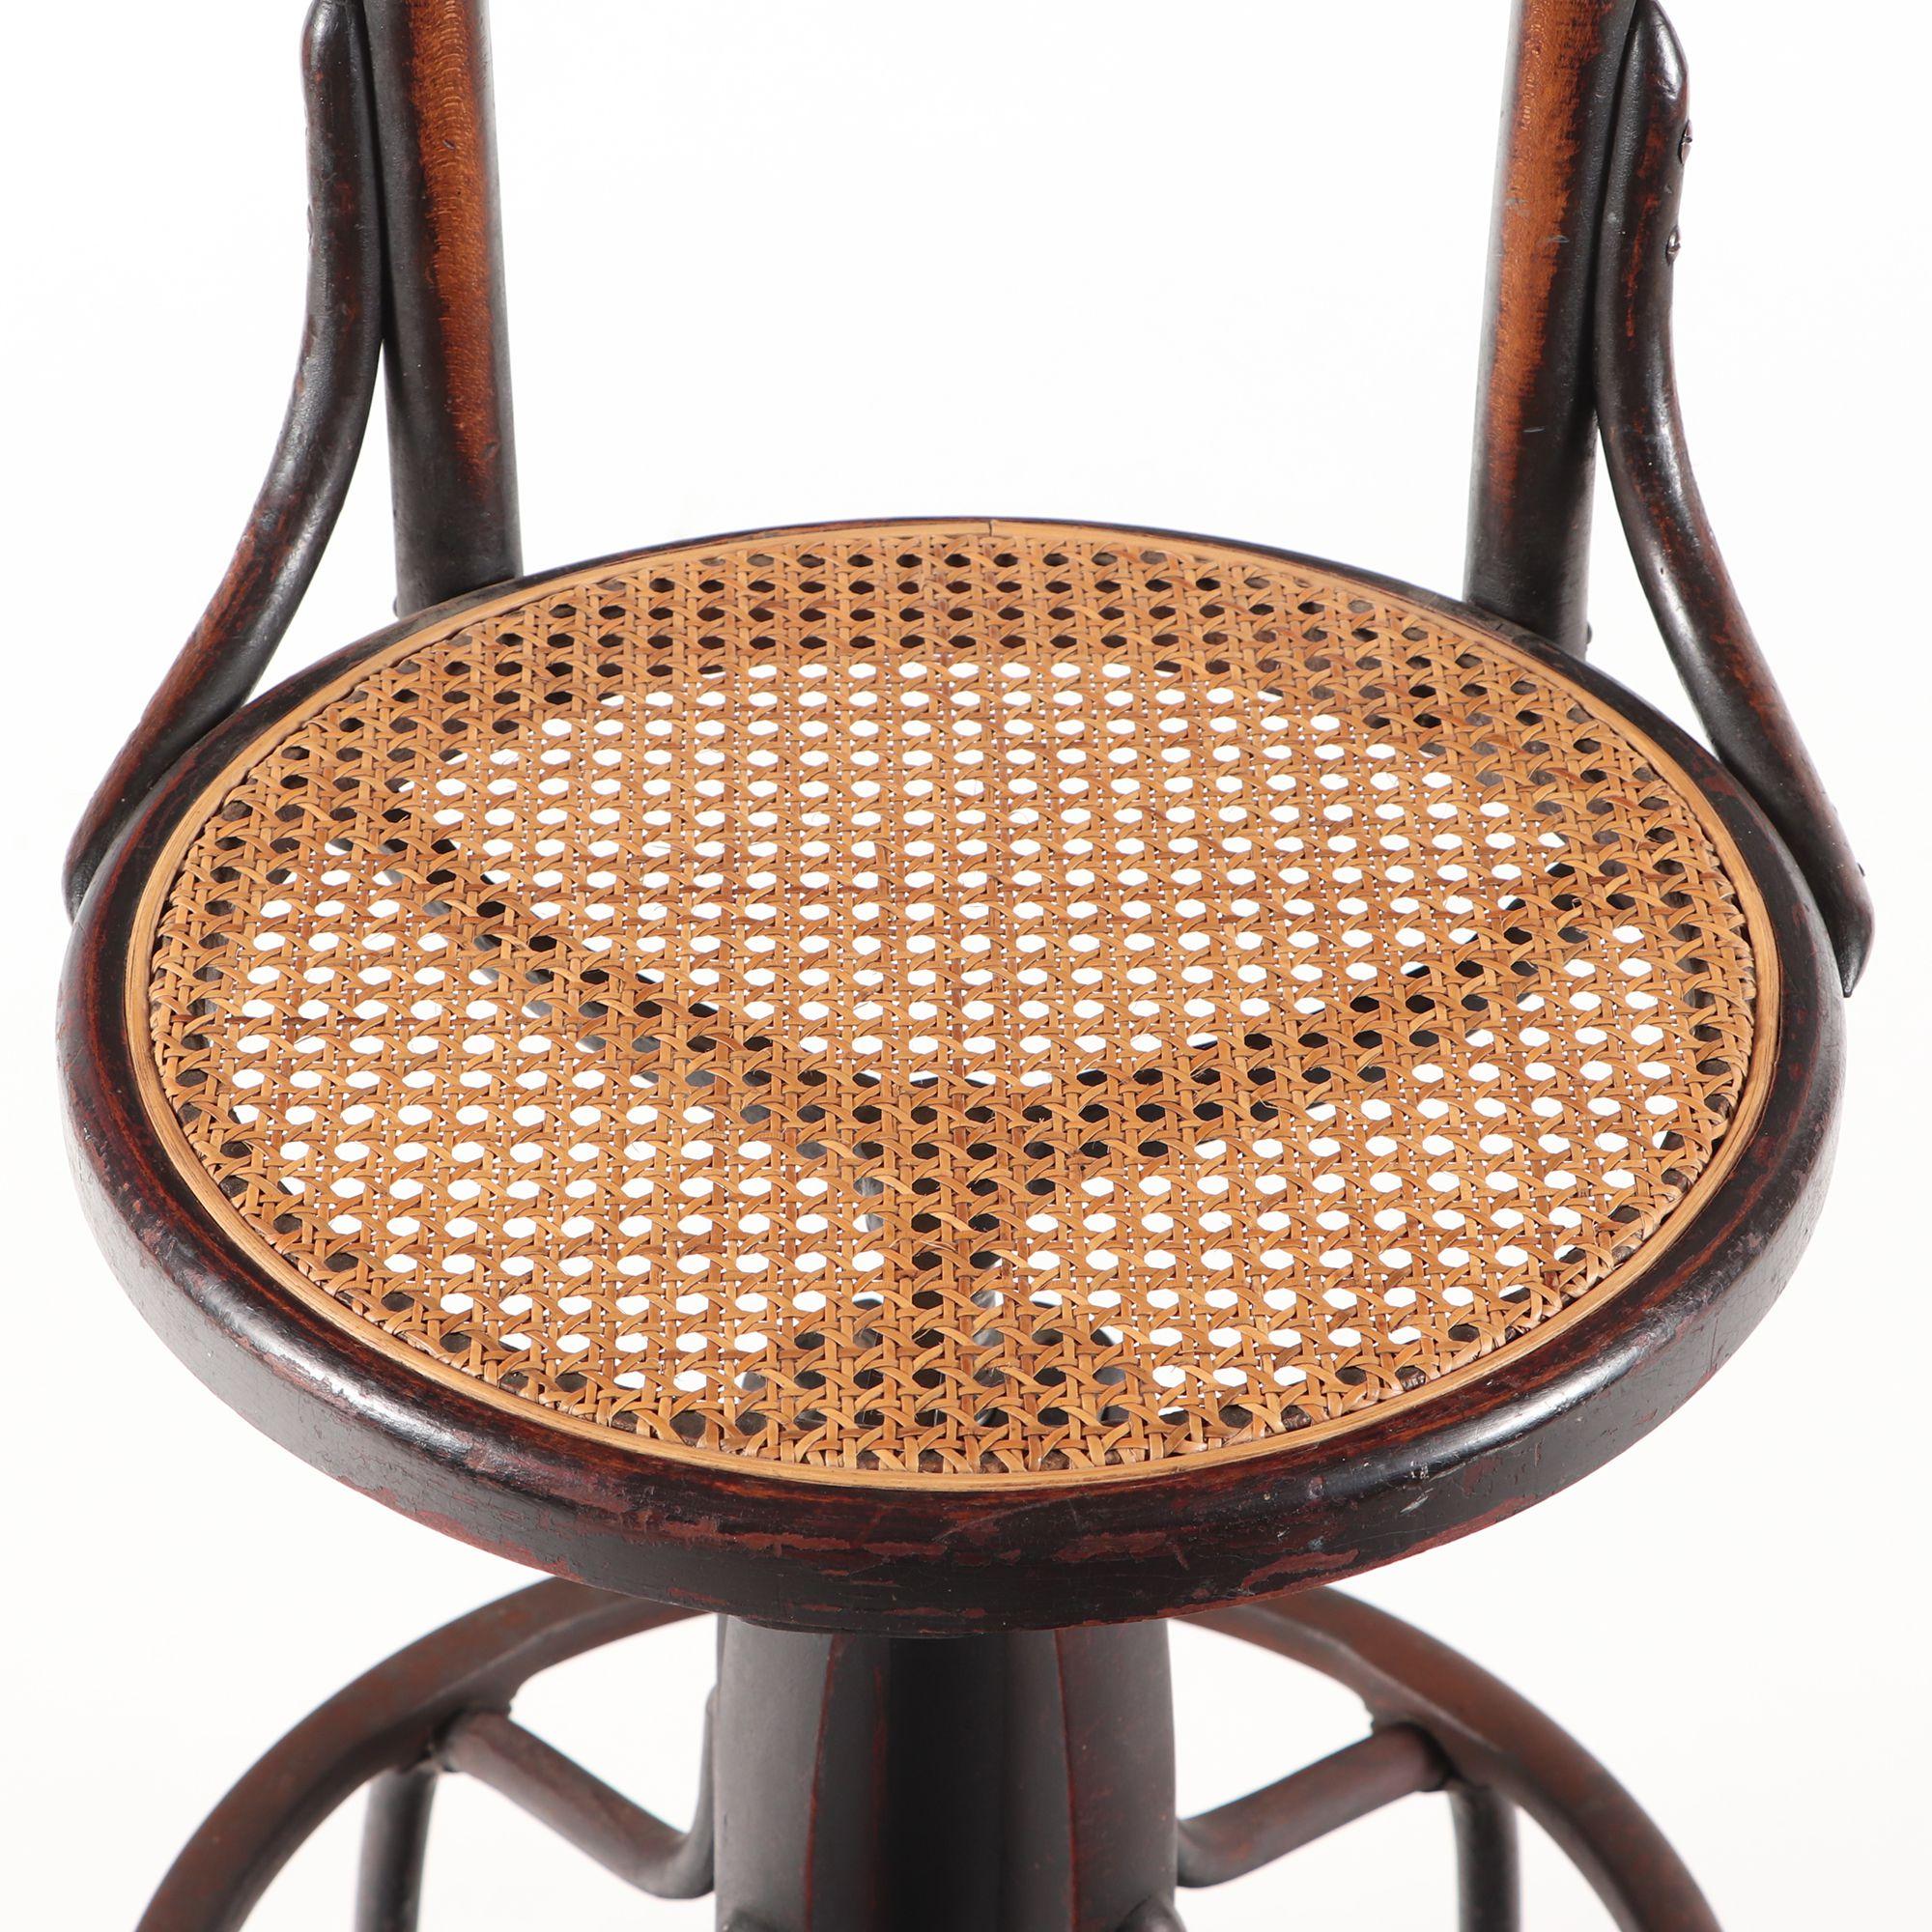 Mid-20th Century Industrial Swivel Stool or Telephone Operator's Chair, circa 1930